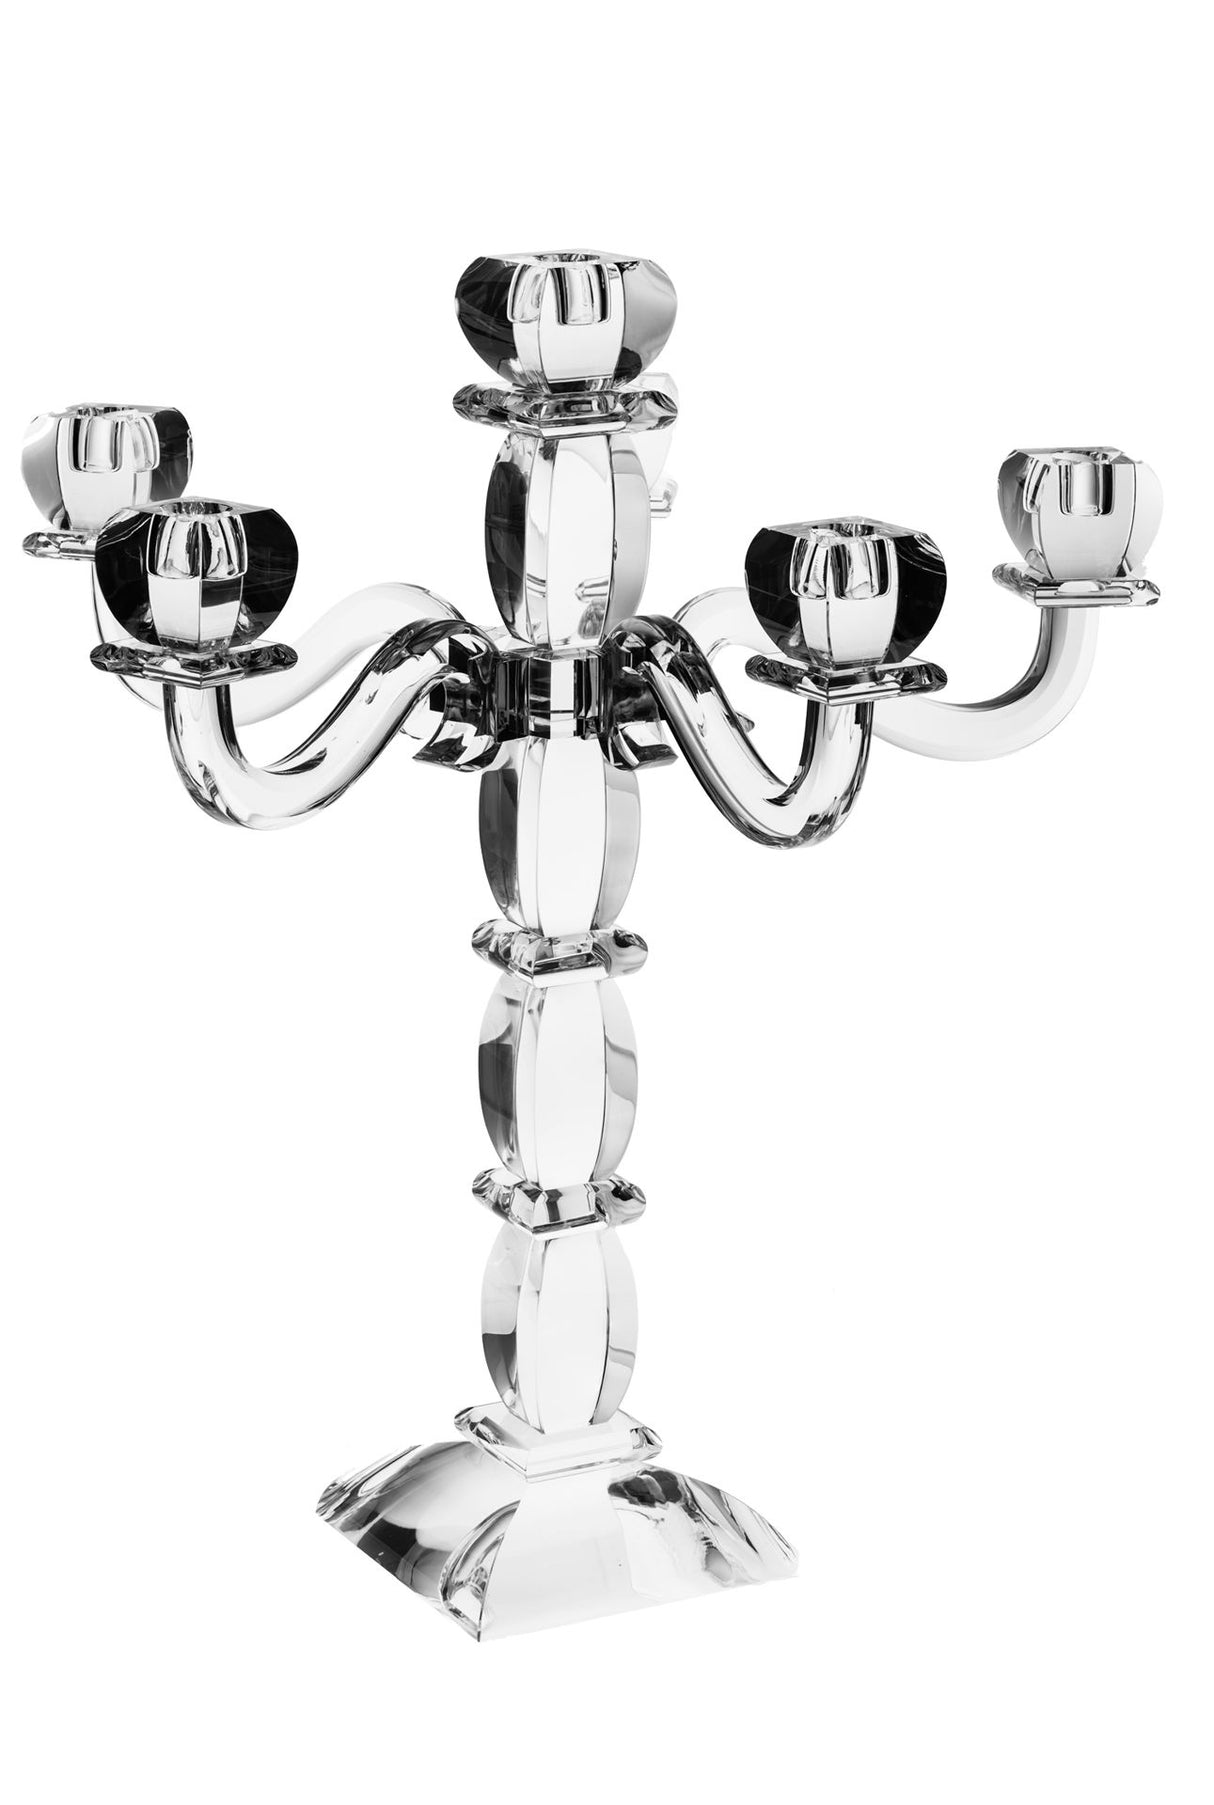 Candelabra -6 Branches-Ornate- Clear Crystal With Silver Decoration